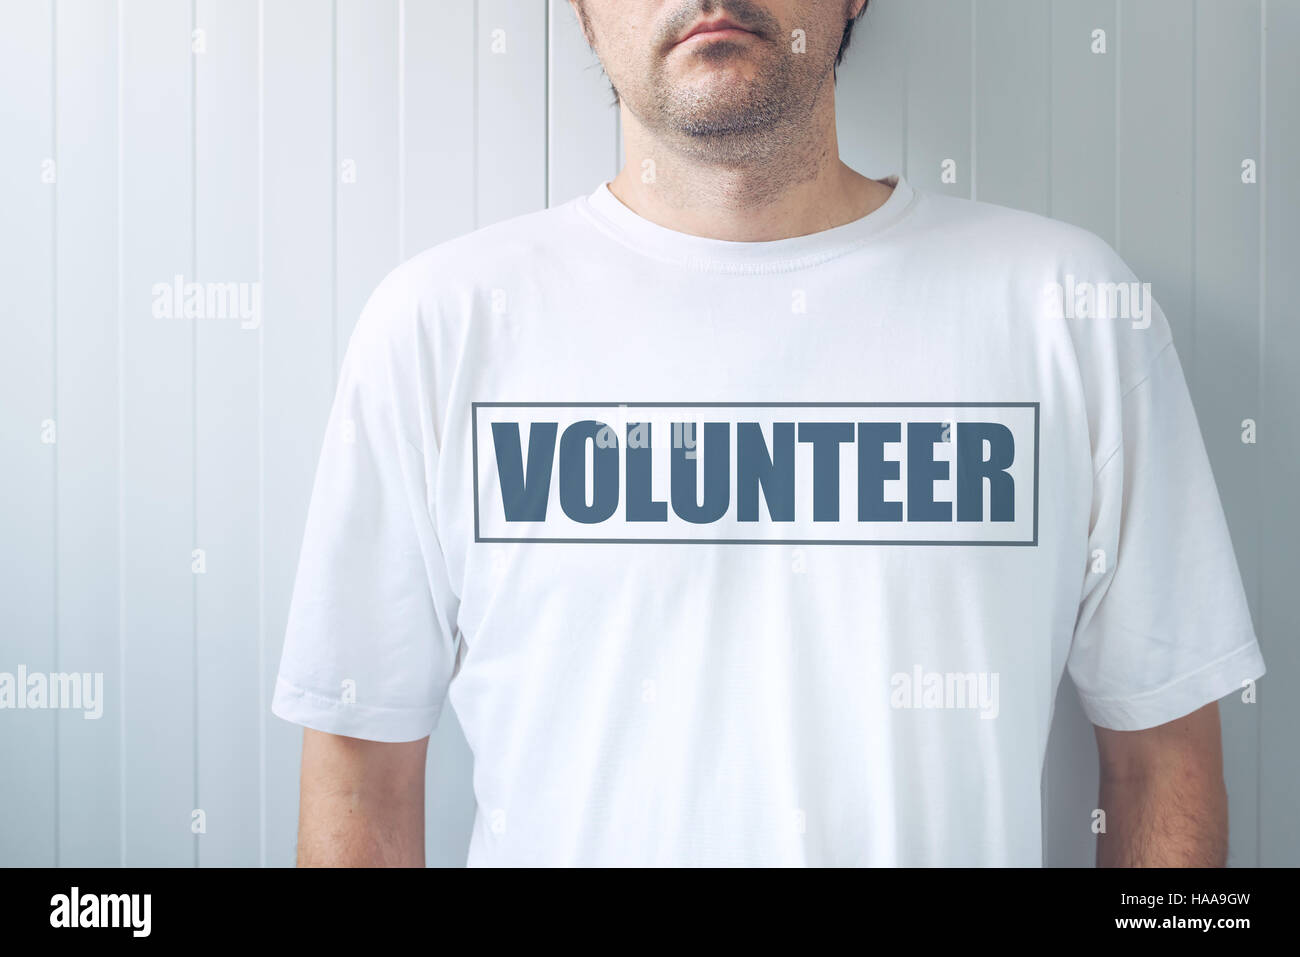 Guy wearing shirt with Volunteer label printed on chest, confident friendly person offering help Stock Photo